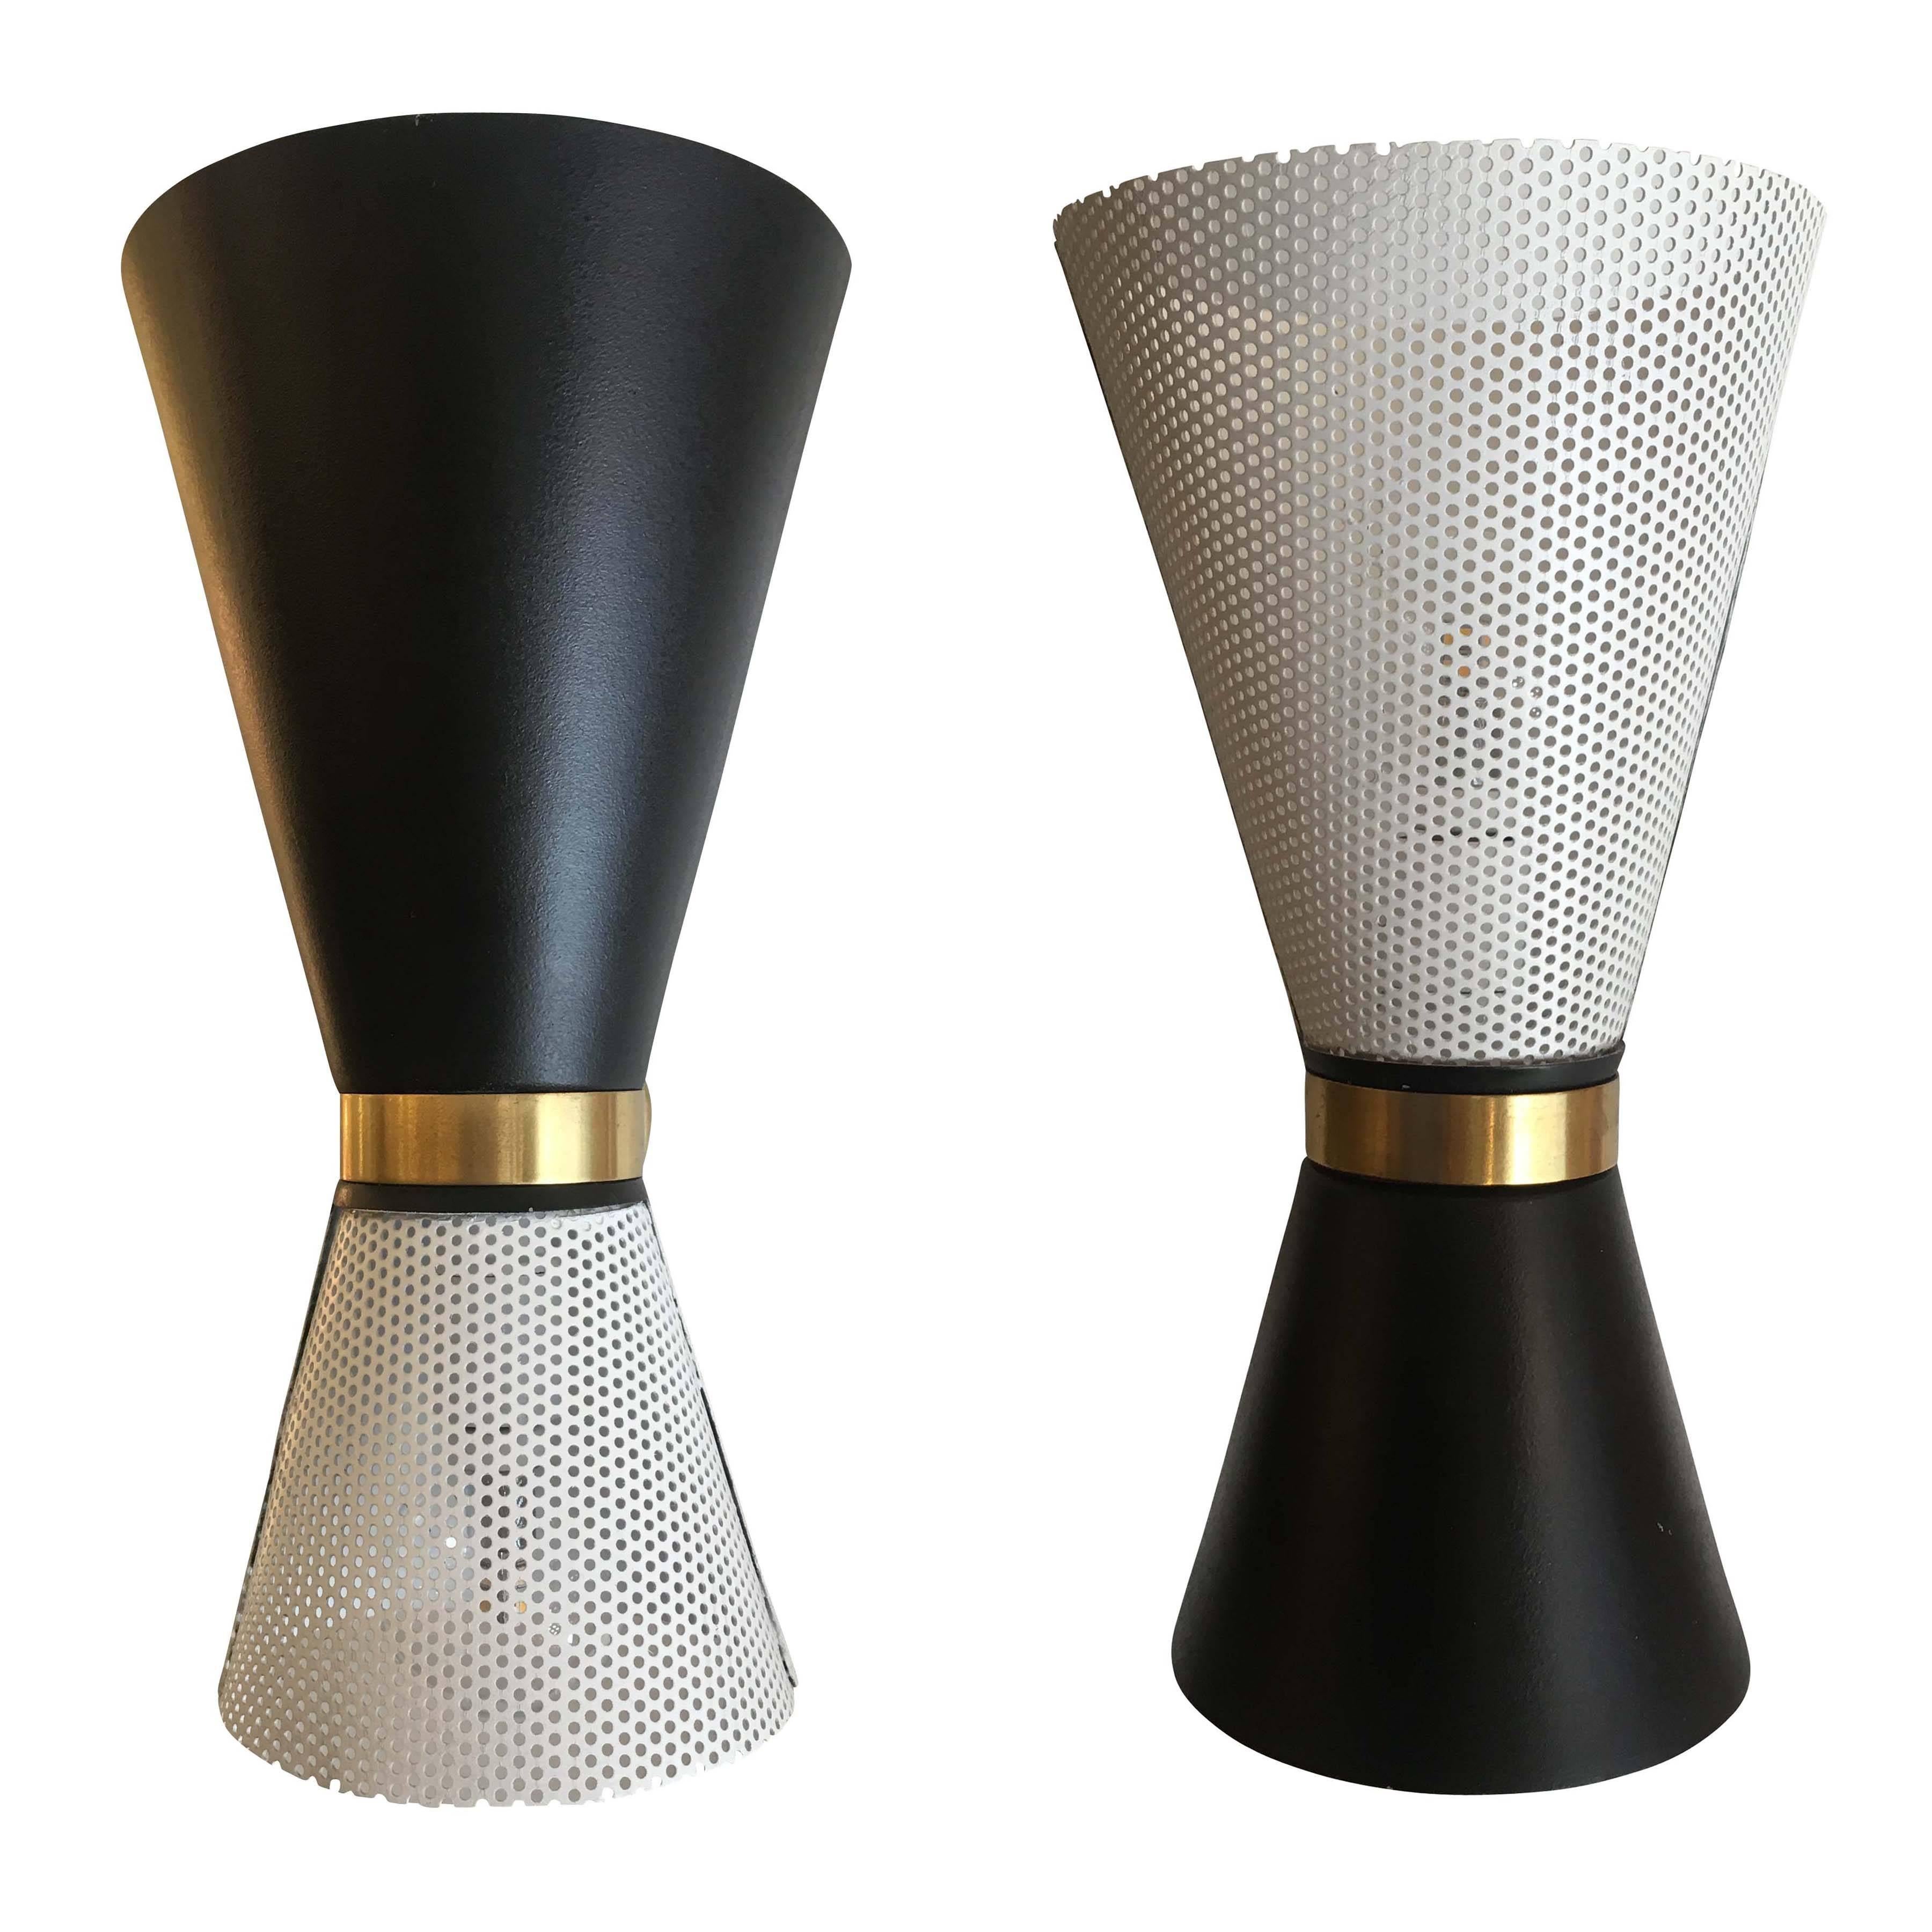 Alternating black and white perforated sconces by Stilnovo from the 1960s. Back plate and centre loop are brass. Each holds two candelabra sockets.